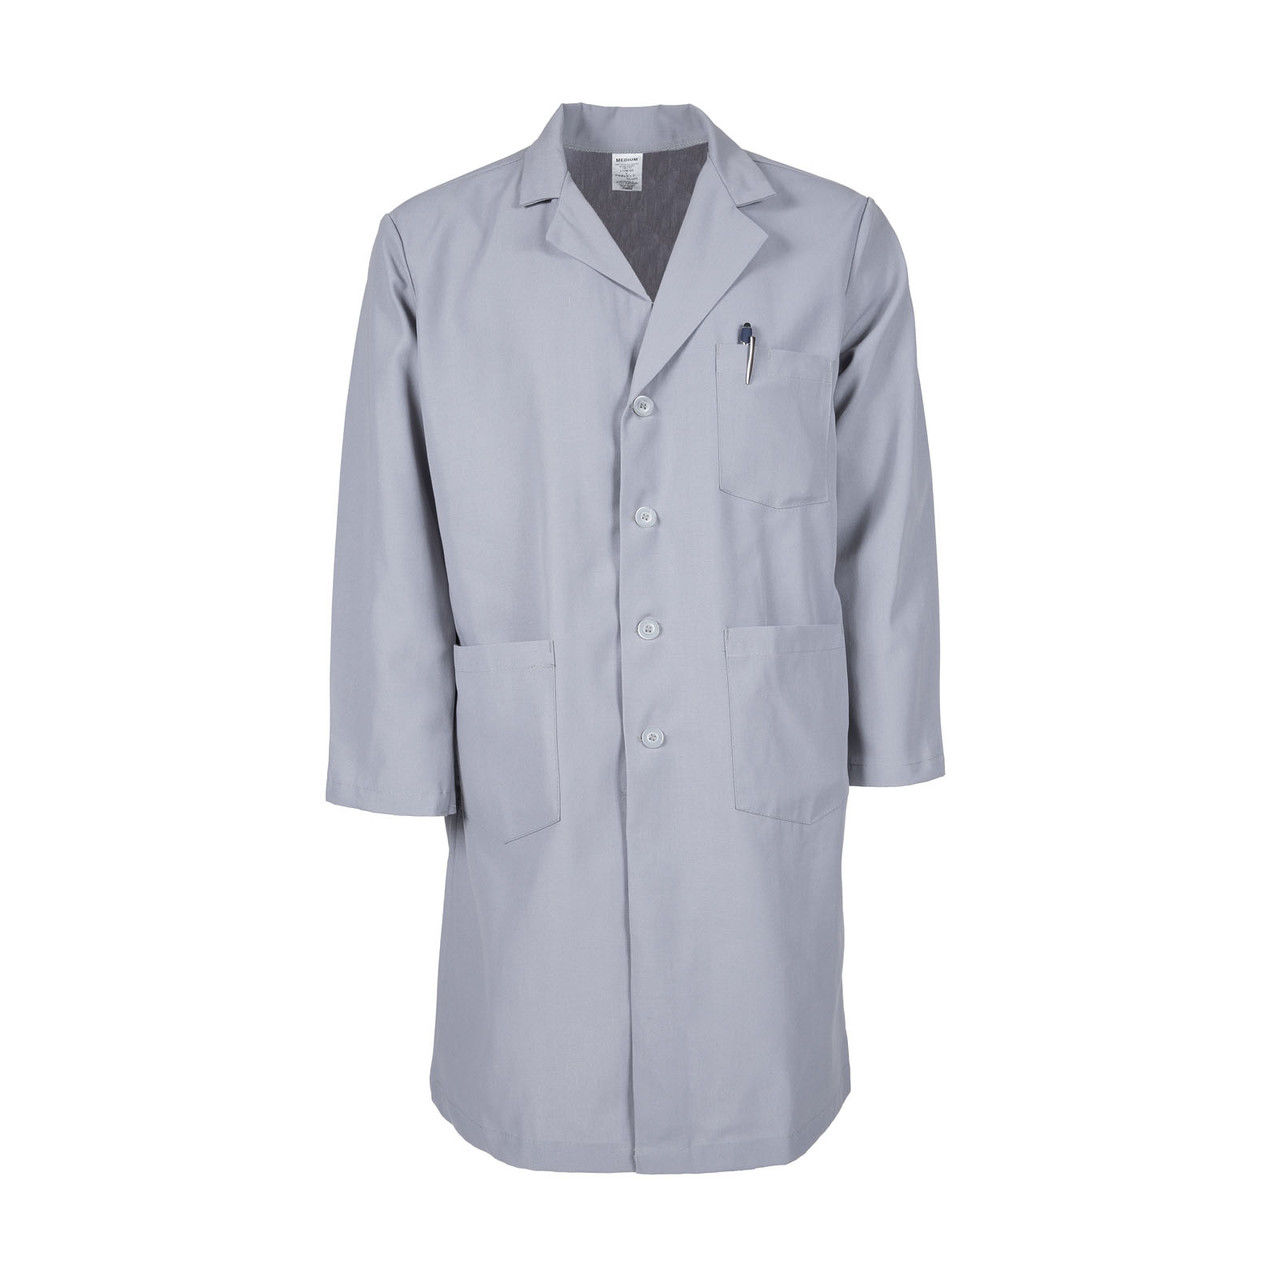 Does the grey lab coats for men have side slit access?